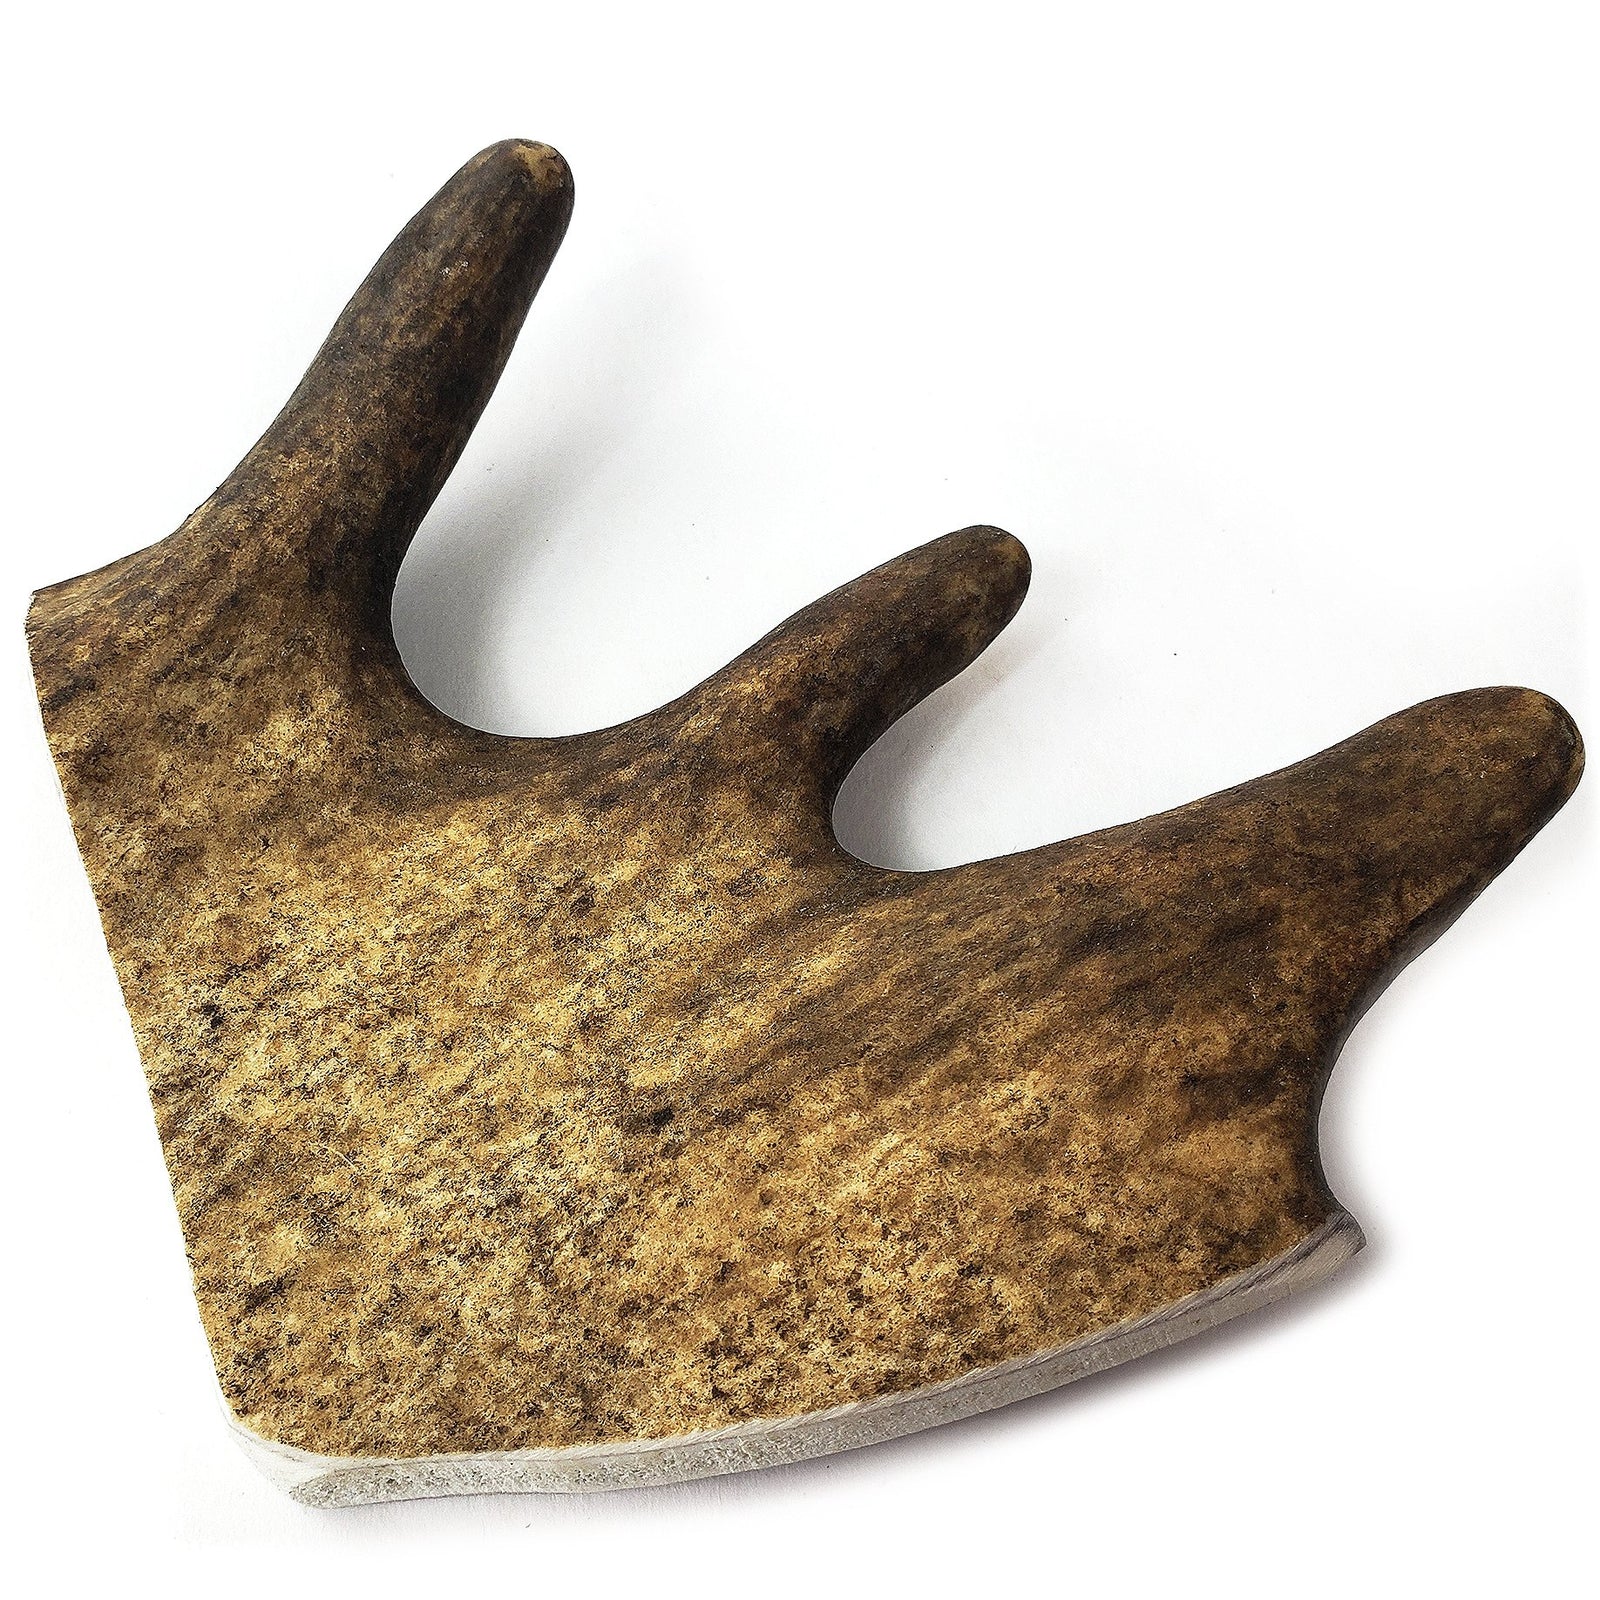 Tuesday's Natural Dog Company Power Paddle Deer Antler Dog Chew